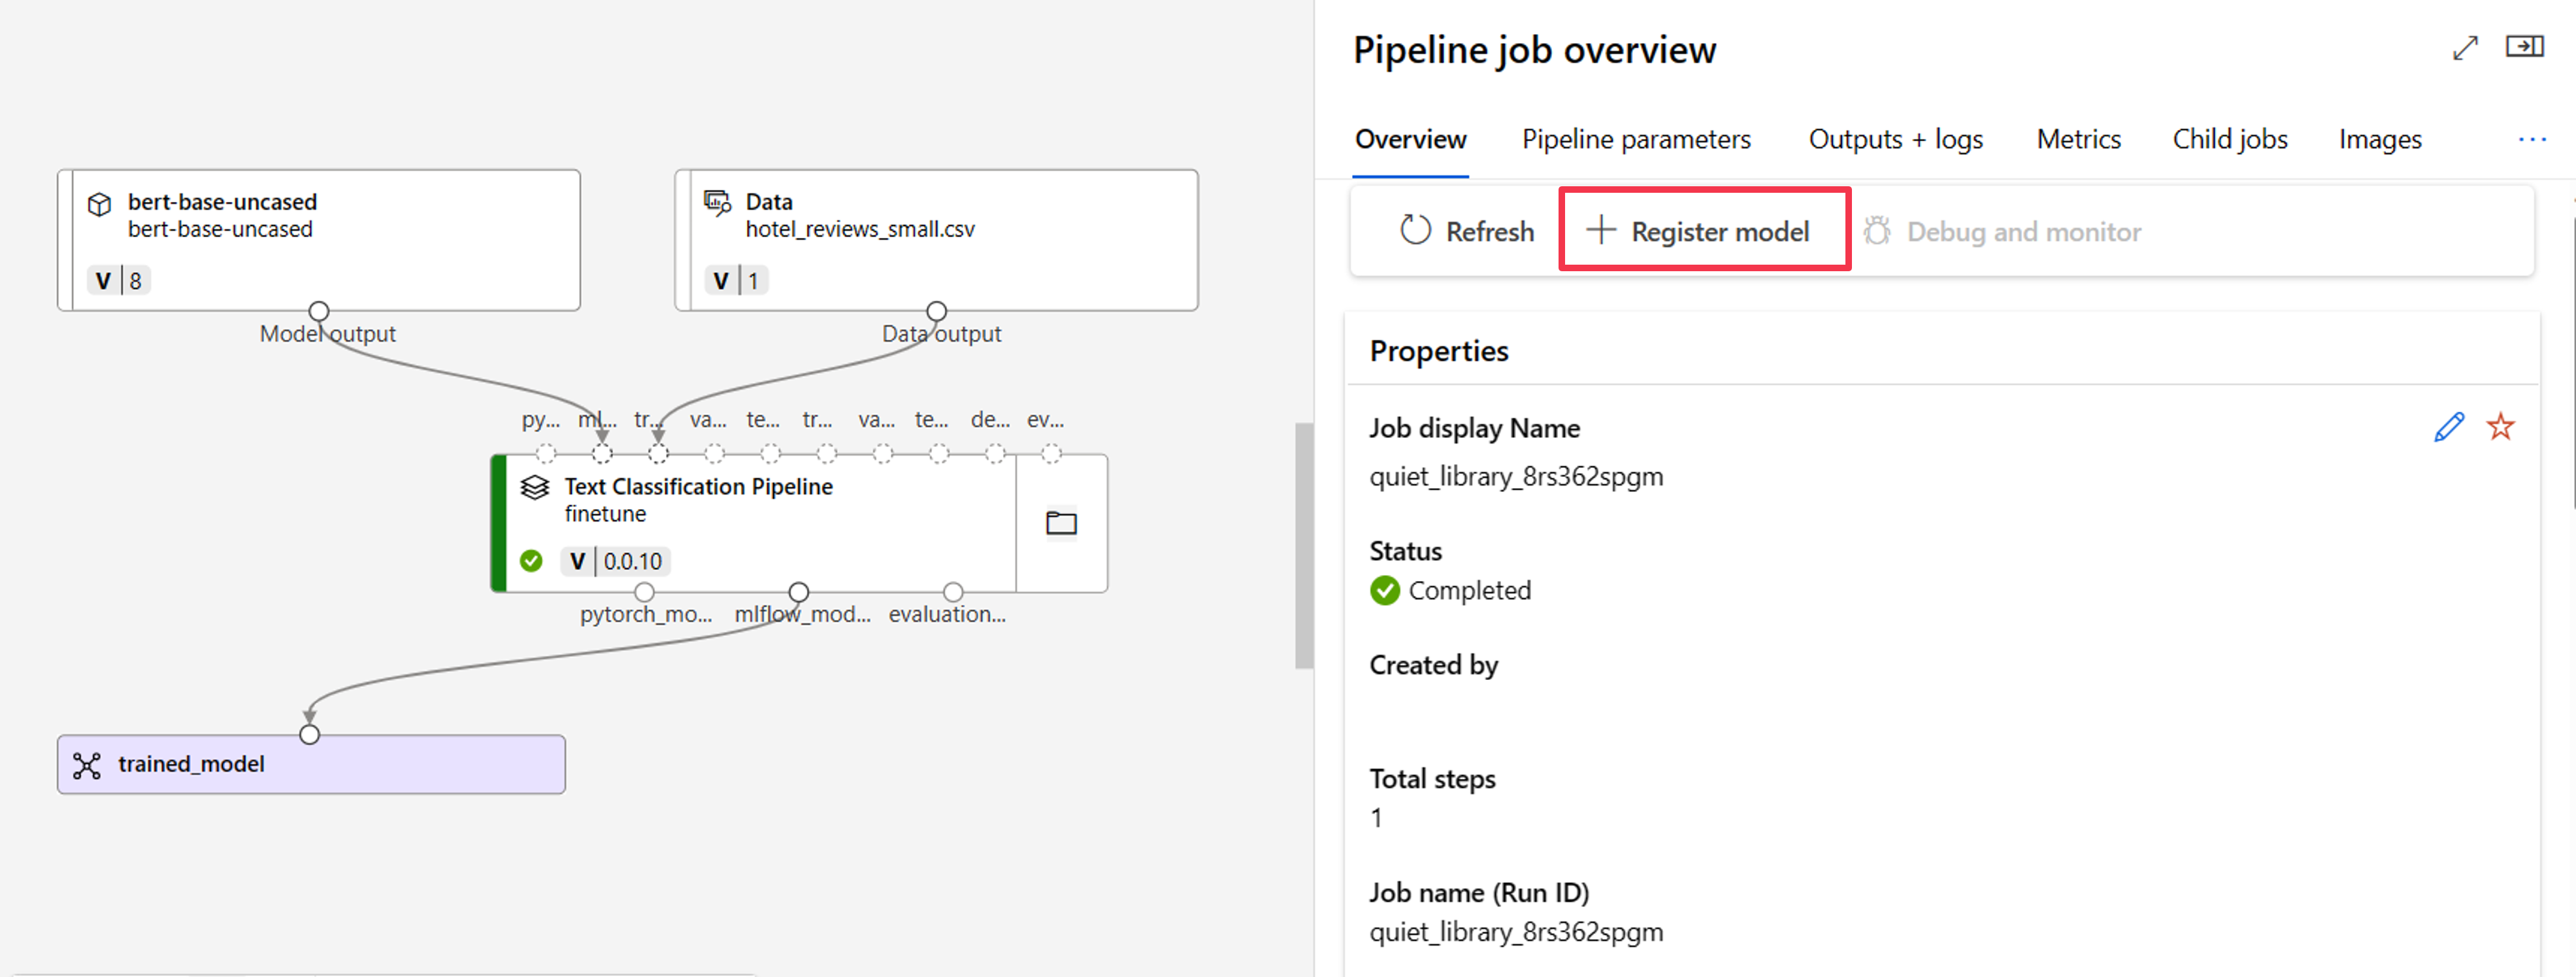 Screenshot of pipeline job overview with register model feature.